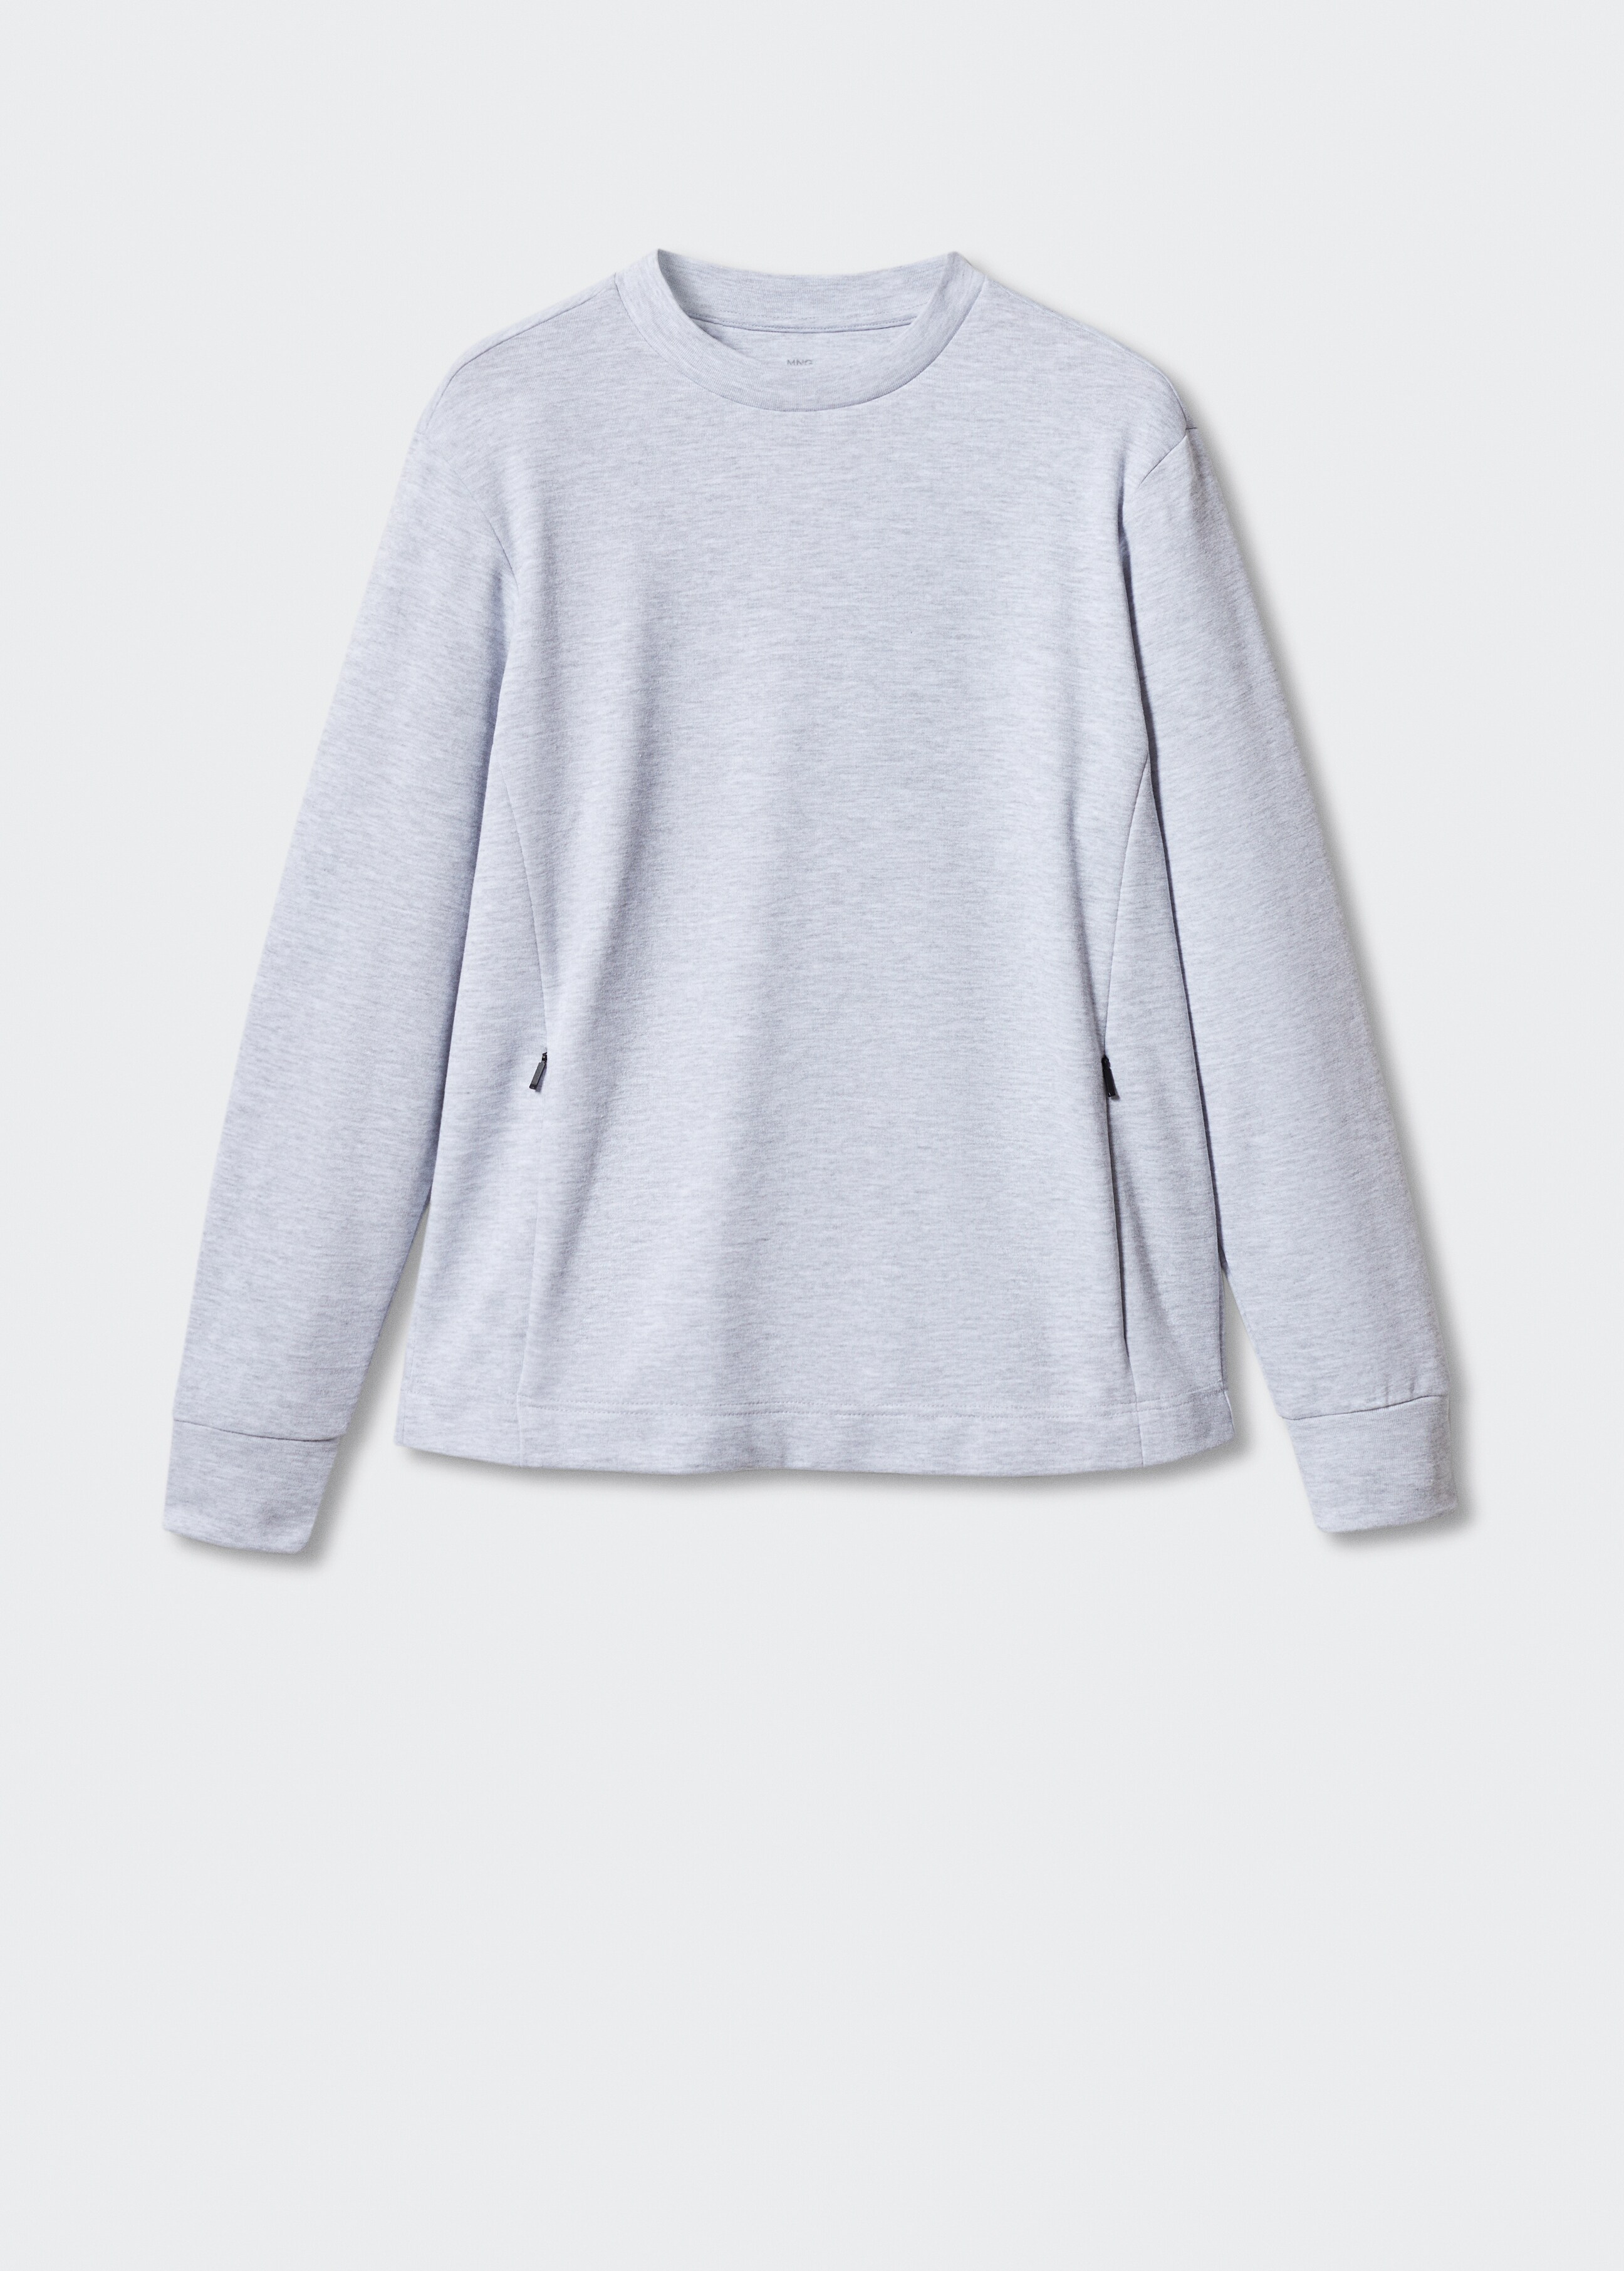 Breathable antibacterial sweatshirt - Article without model